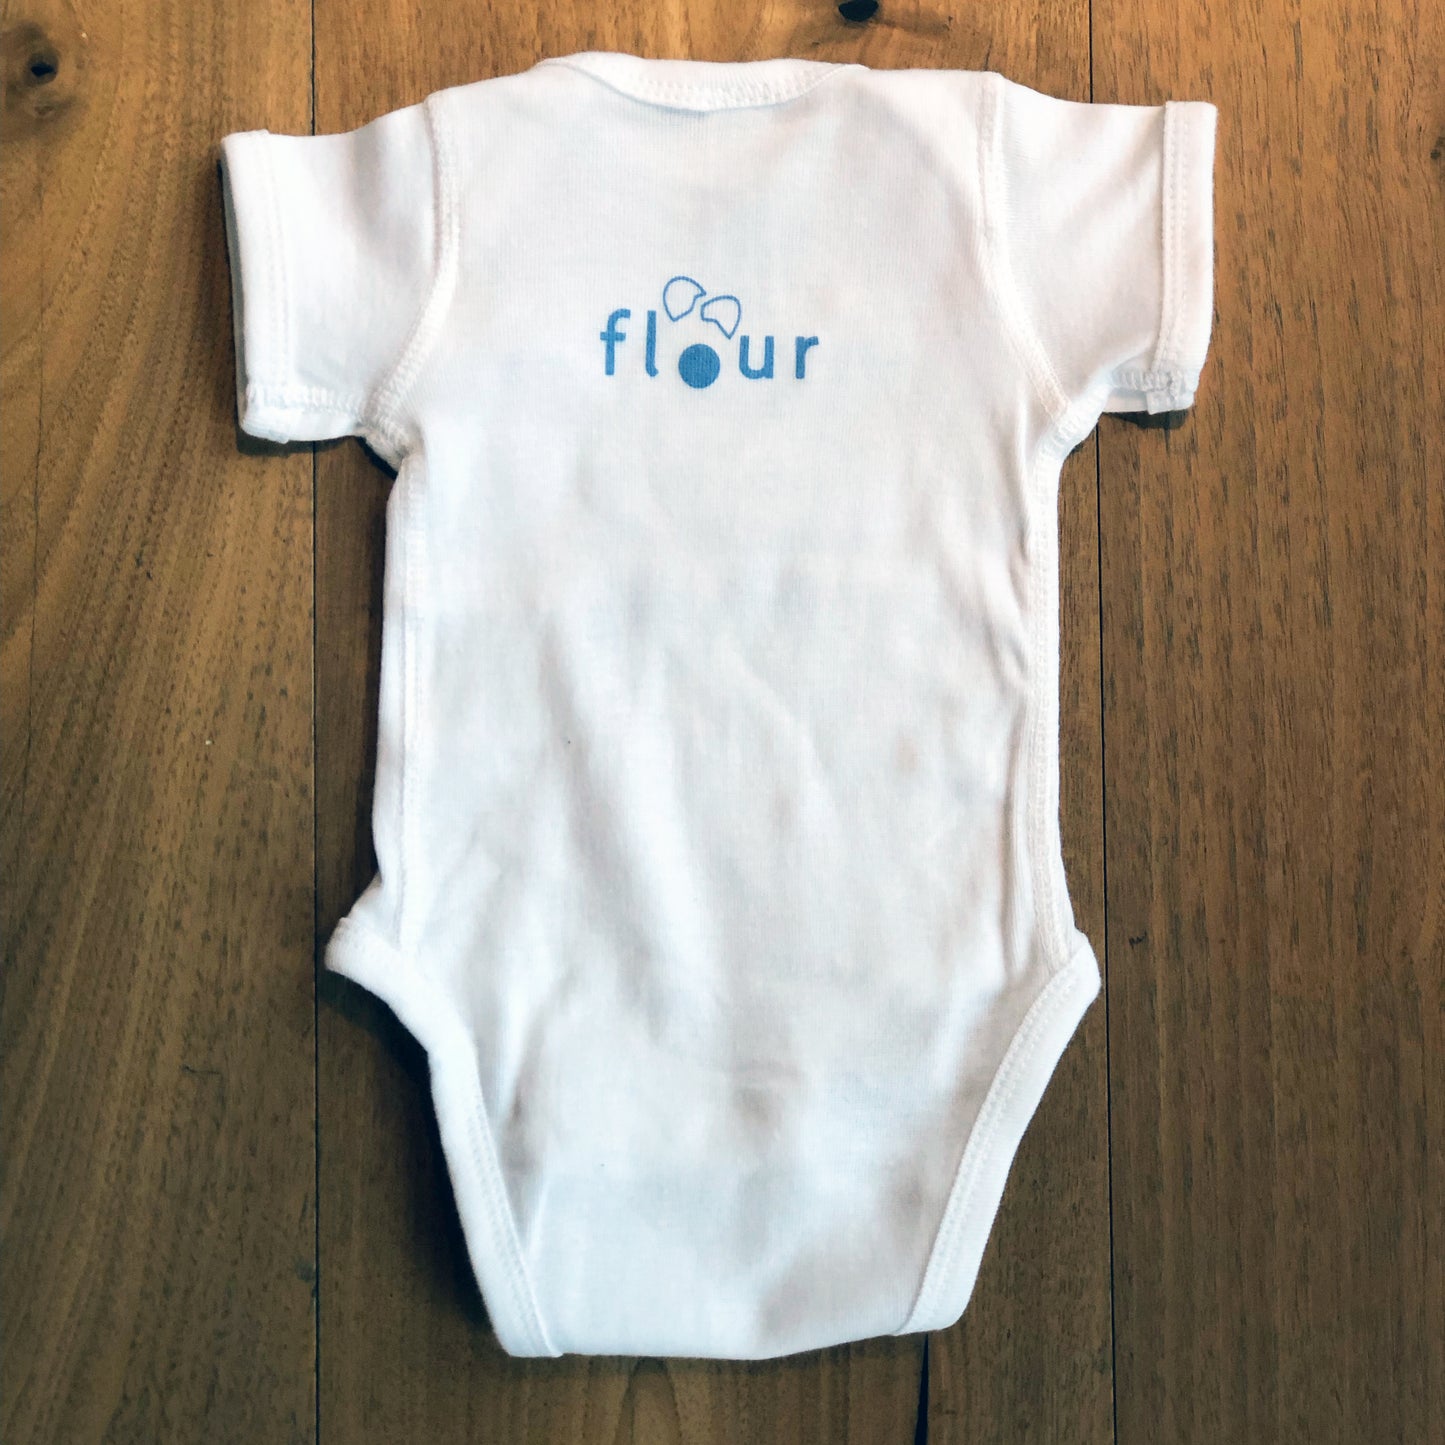 flour baby onesie - fresh out of the oven